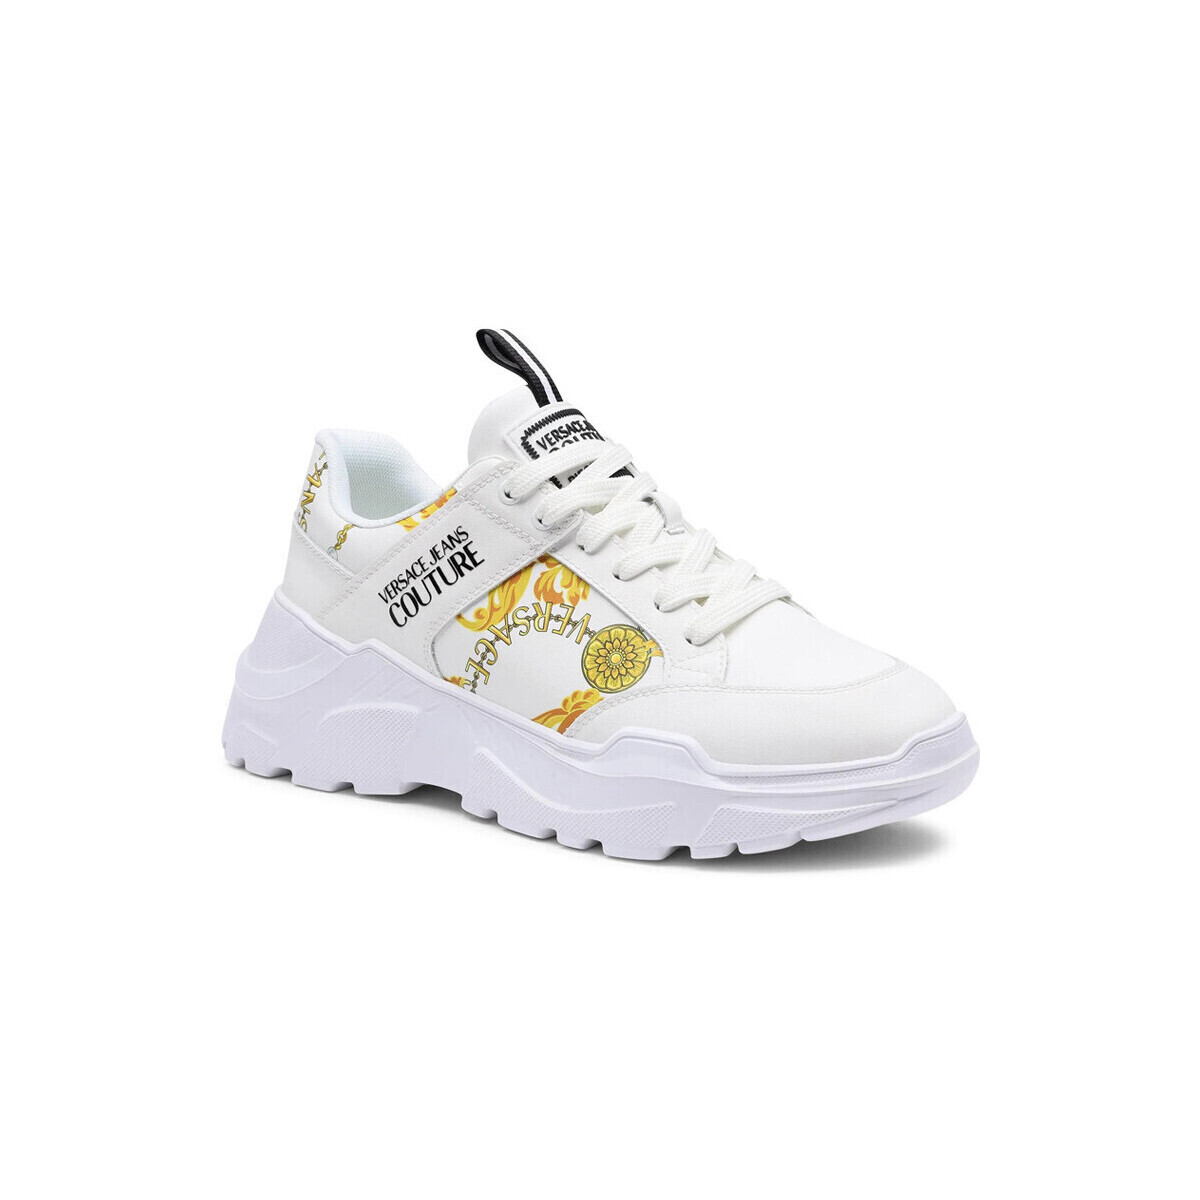 Versace Jeans Couture Blanc Sneakers Blanc q2dYXlso